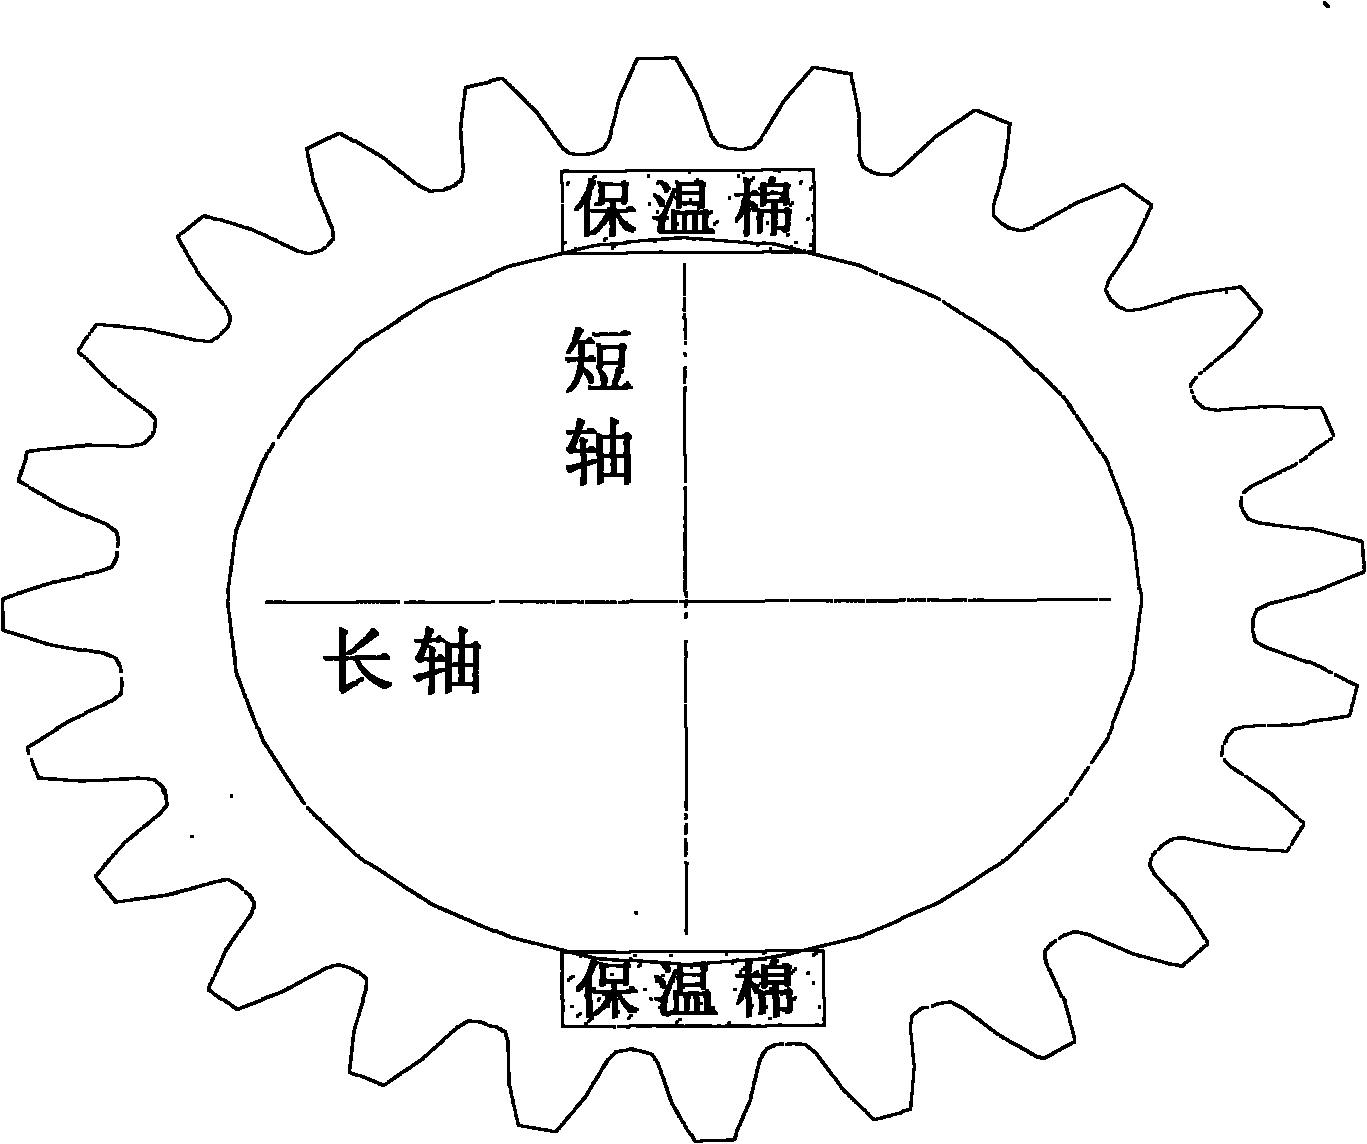 Reversible deformation correcting method for elliptical gear ring subjected to deformation after carburization